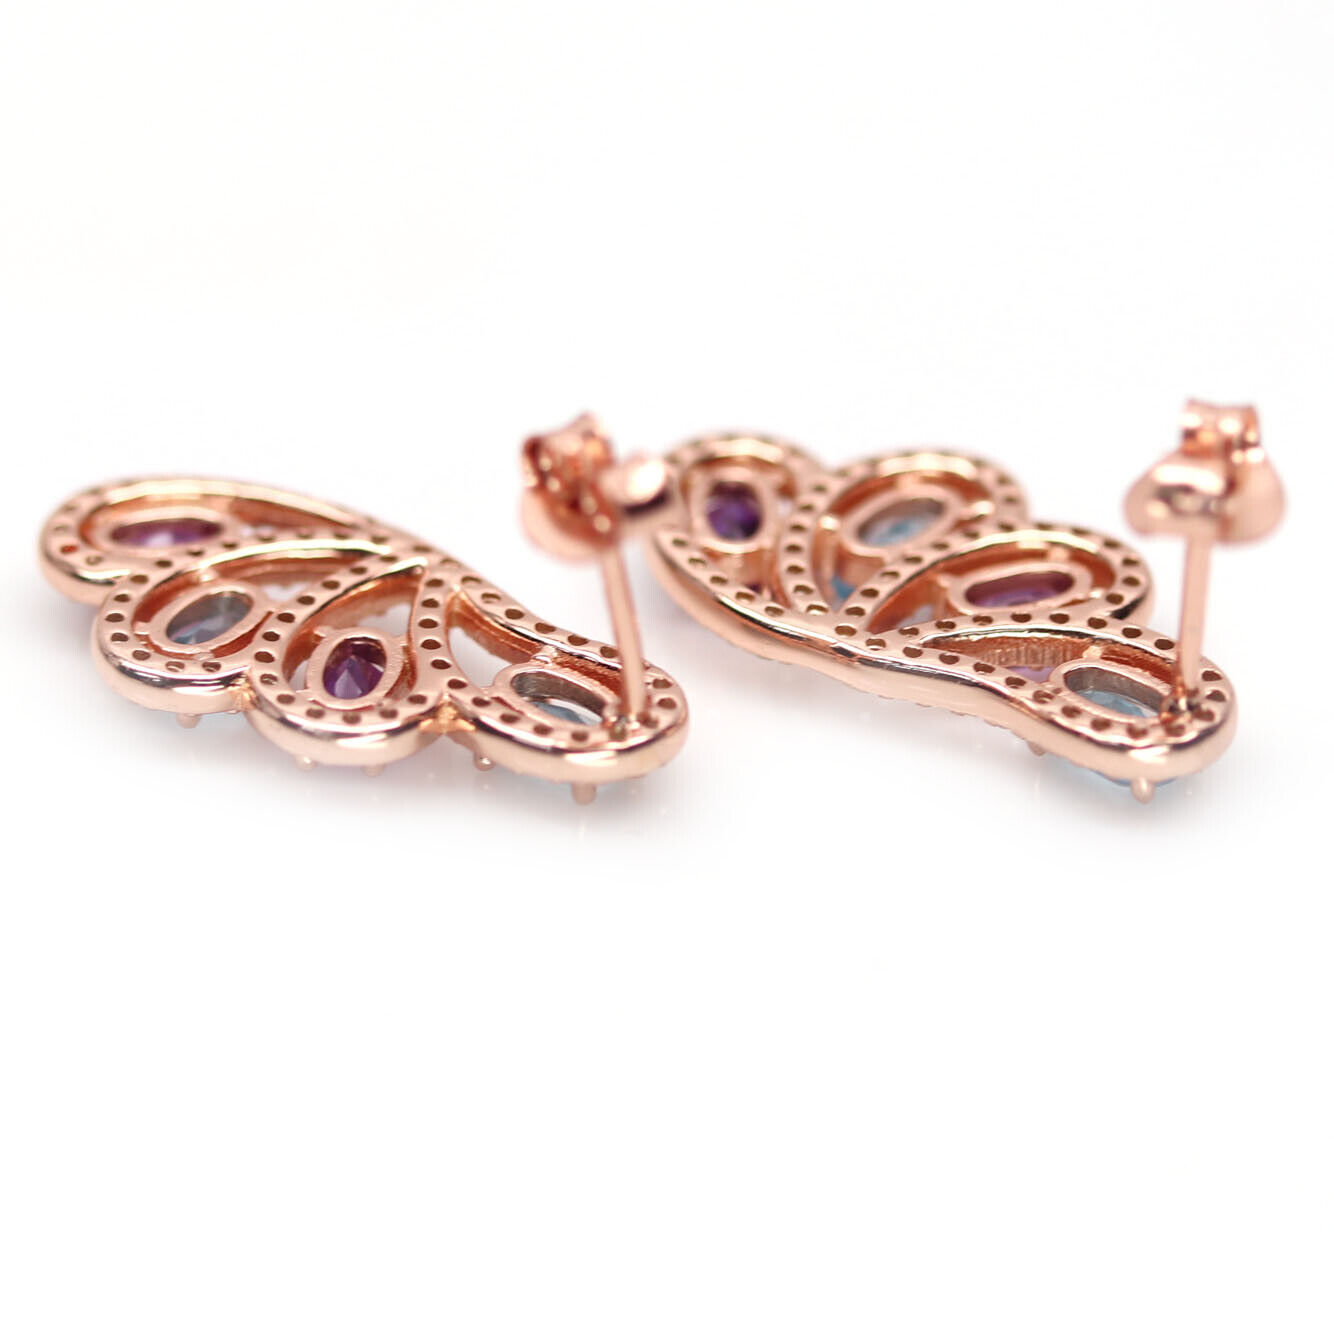 A pair of rose gold on 925 silver earrings set with oval cut blue topaz and amethysts, L. 2.3cm. - Image 2 of 2